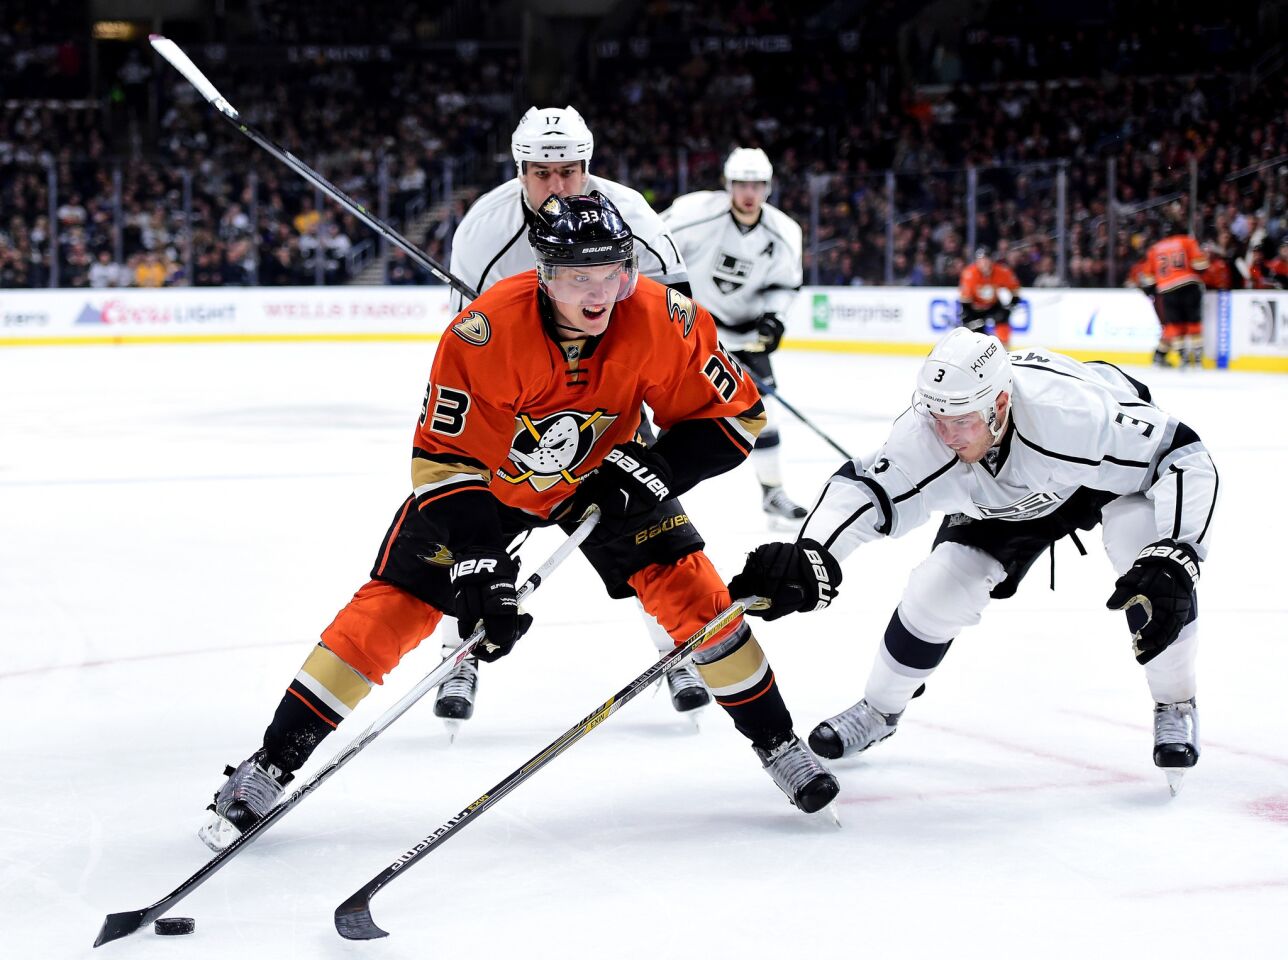 Ducks right wing Jakob Silfverberg controls the puck against Kings defenseman Brayden McNabb during the third period.